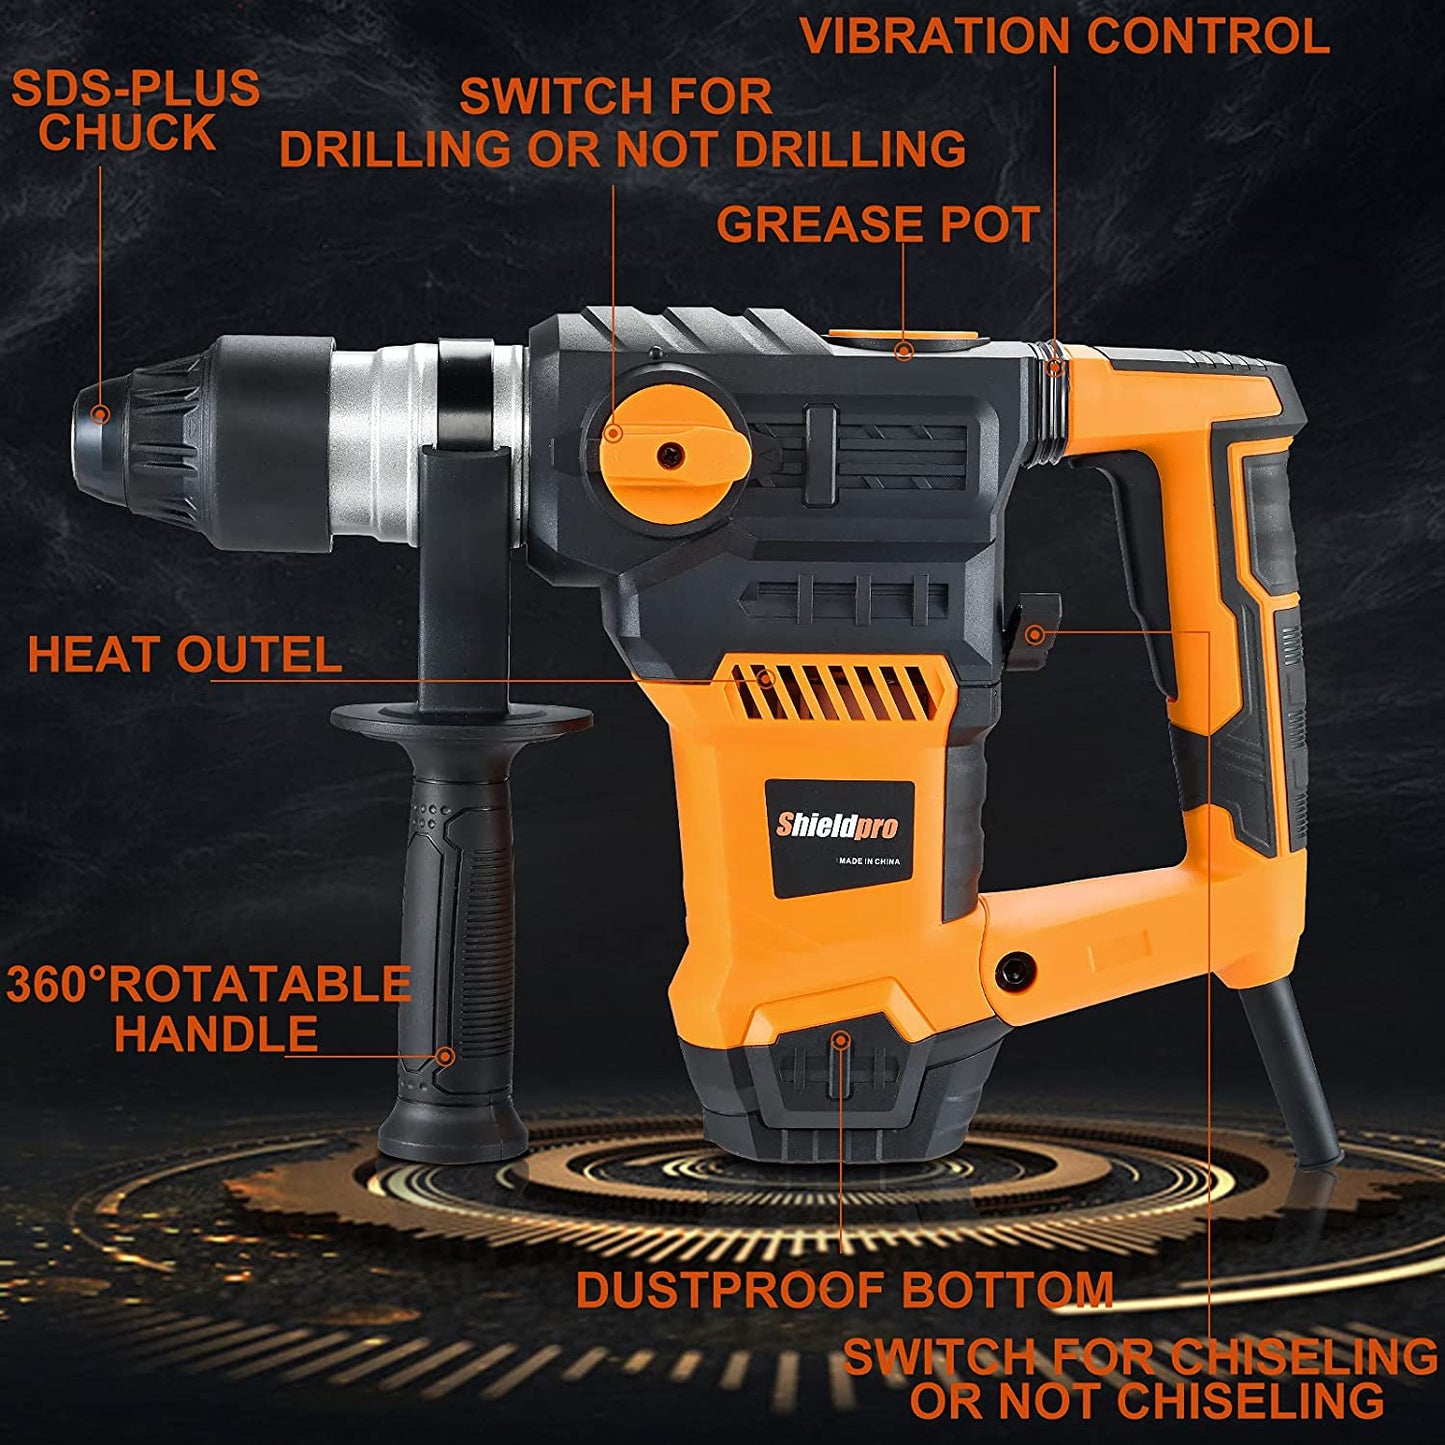 1-1/4 Inch SDS-Plus 13 Amp Rotary Hammer Drill Heavy Duty, 3 Functions, Vibration Control